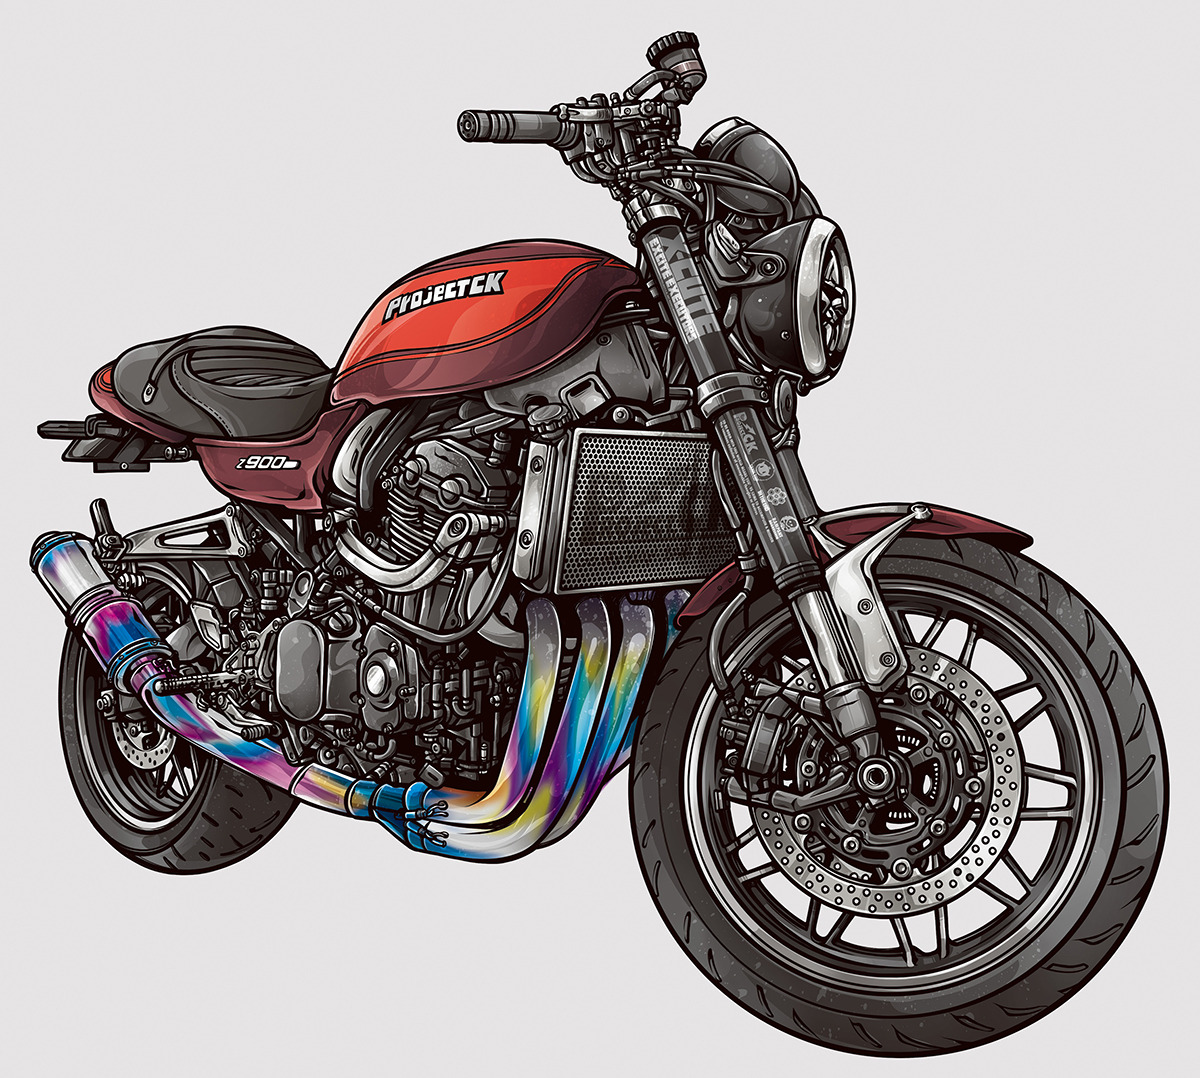 Z900RSのイラスト: THAT'S LIFE